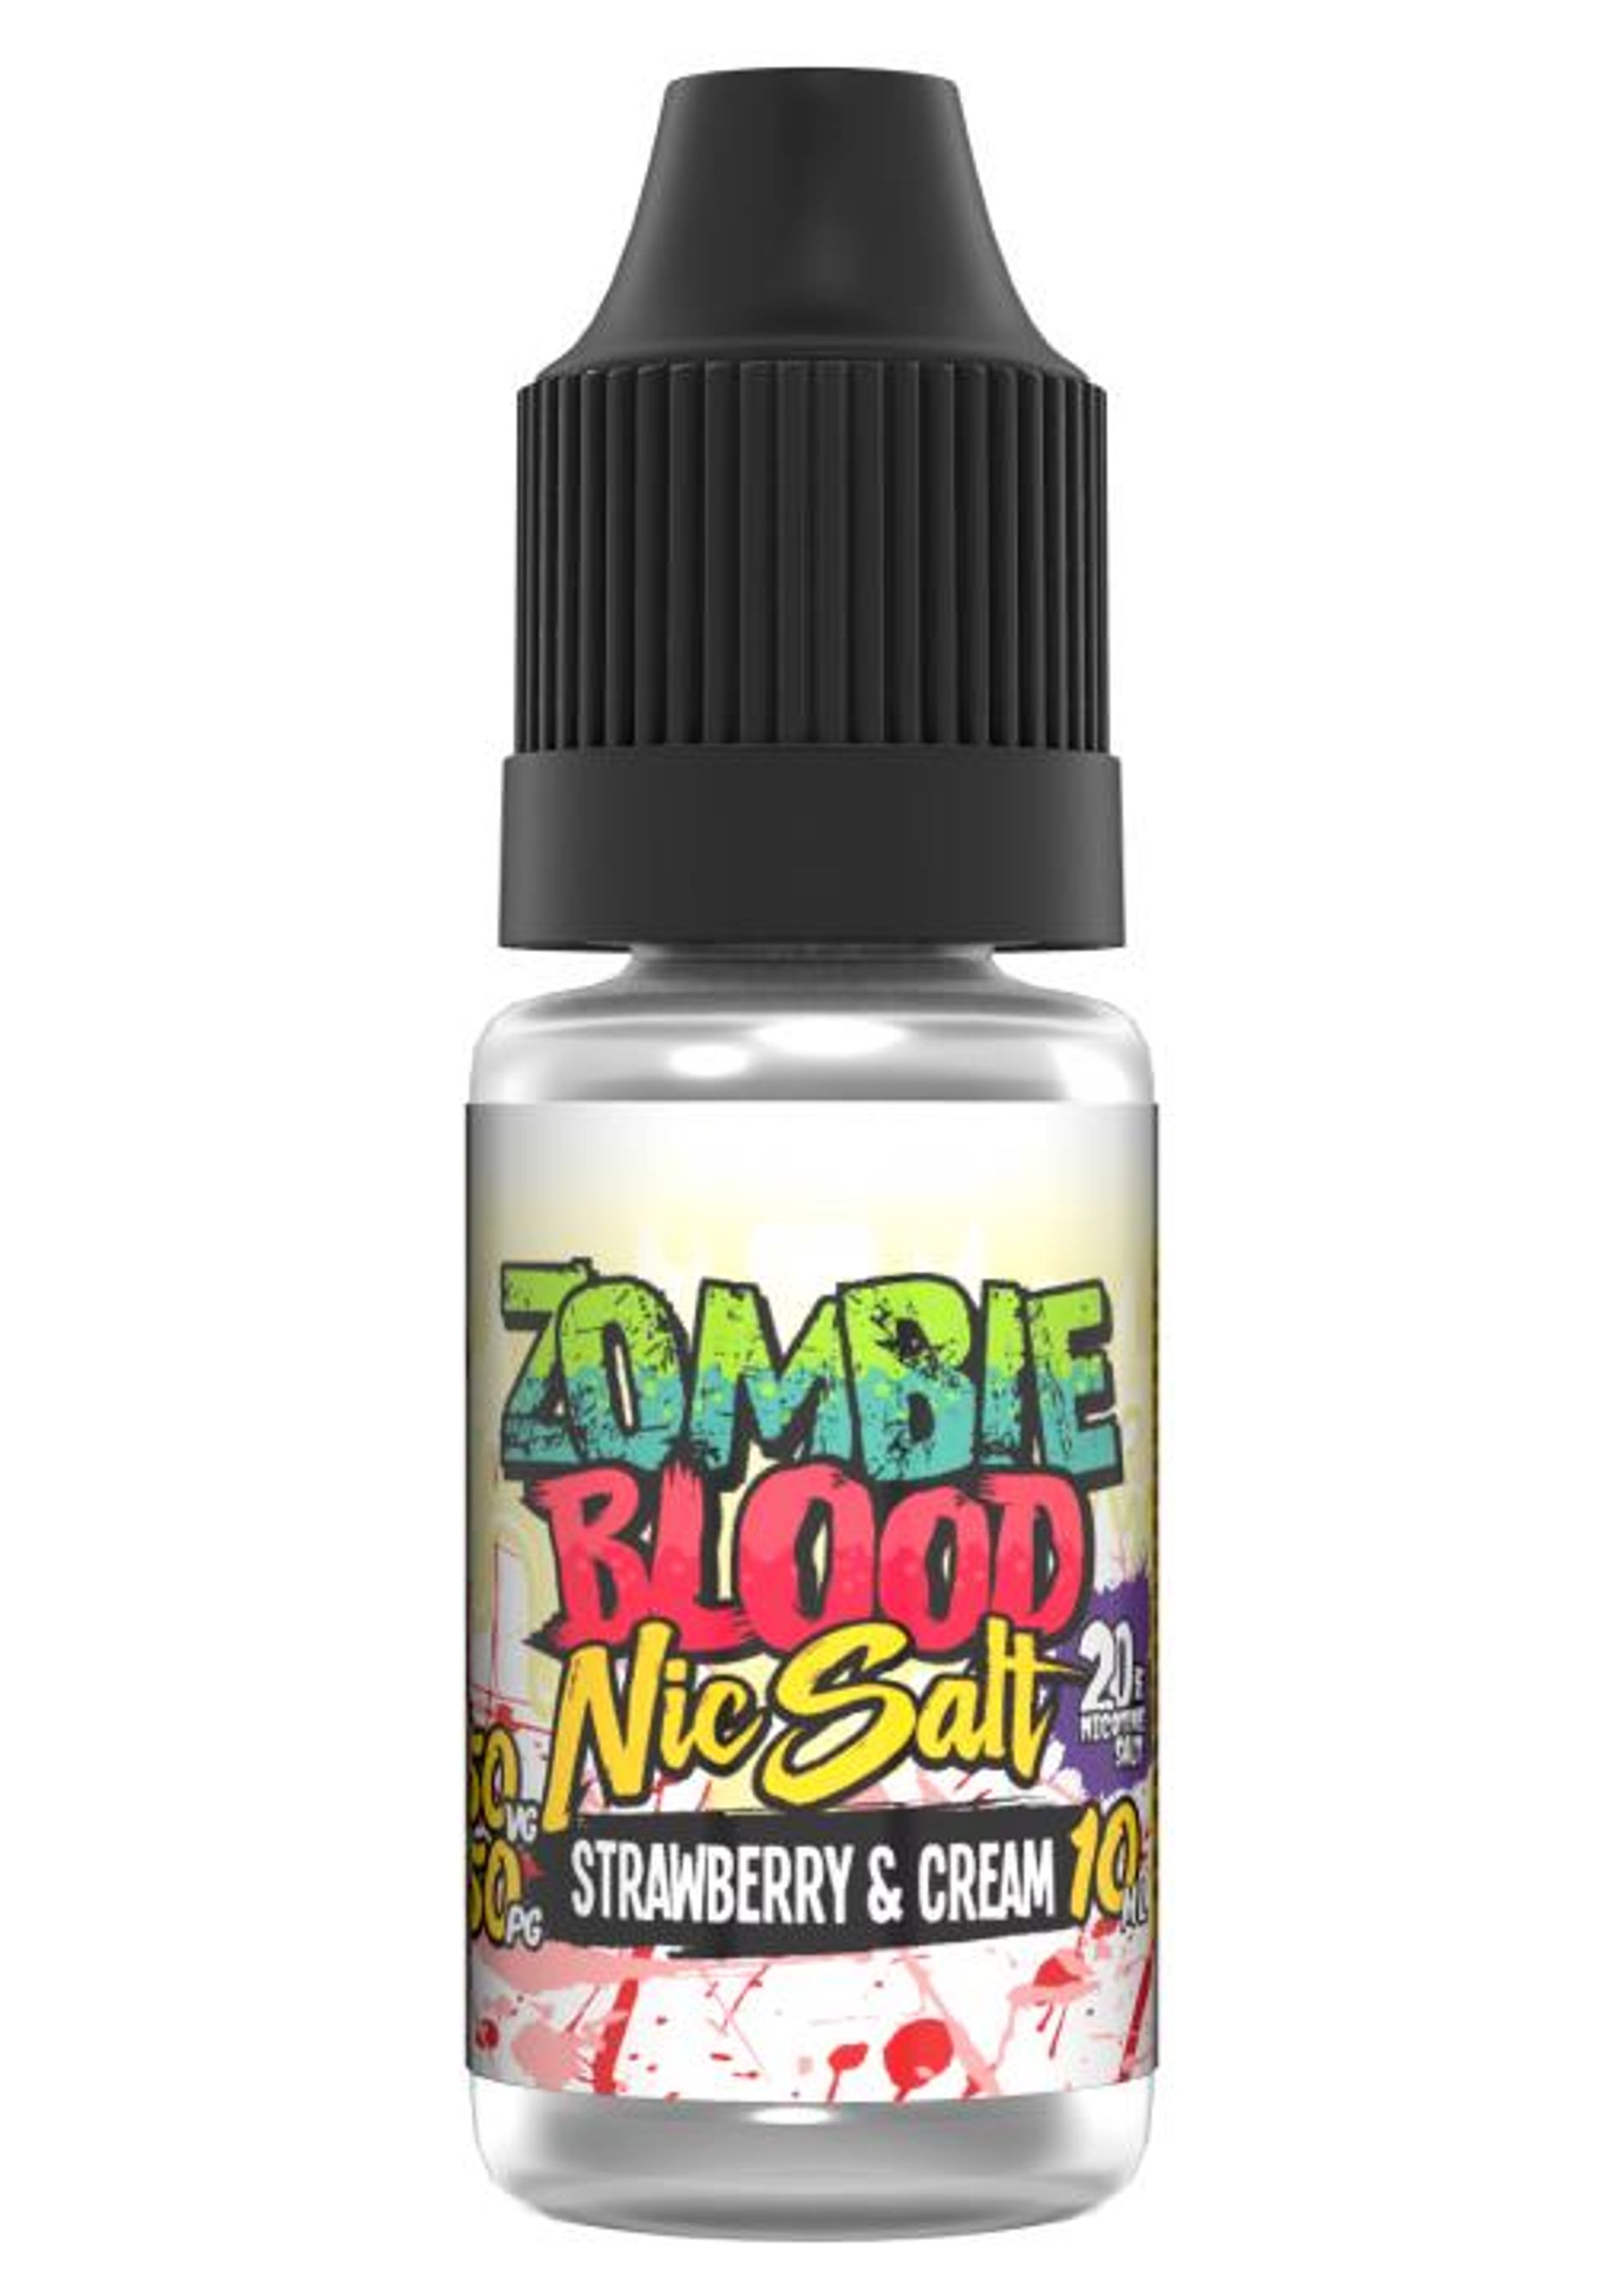 Image of Strawberry & Cream by Zombie Blood